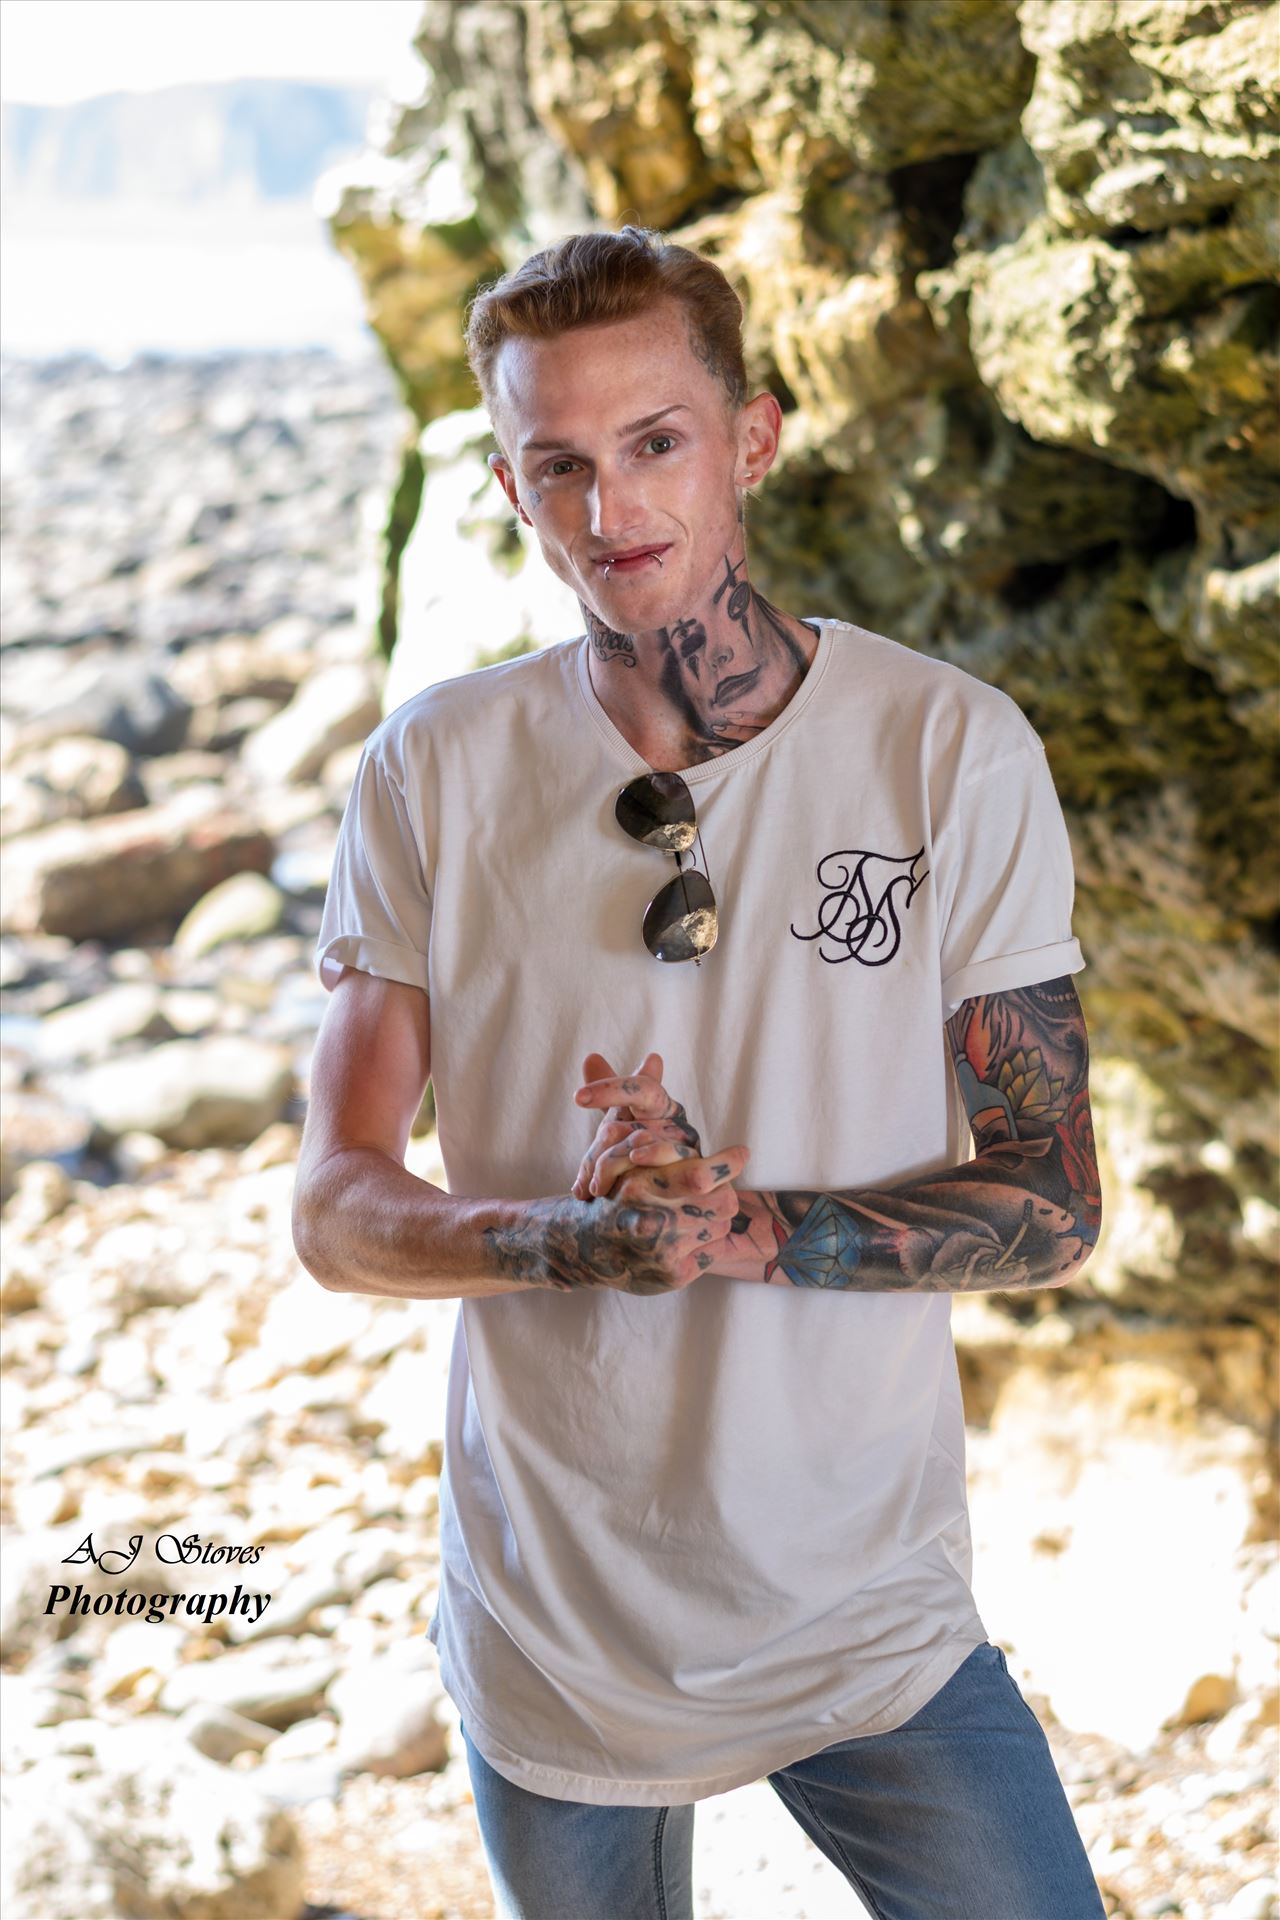 Luke Proctor 05 - Great shoot with Luke down Seaham Beach by AJ Stoves Photography